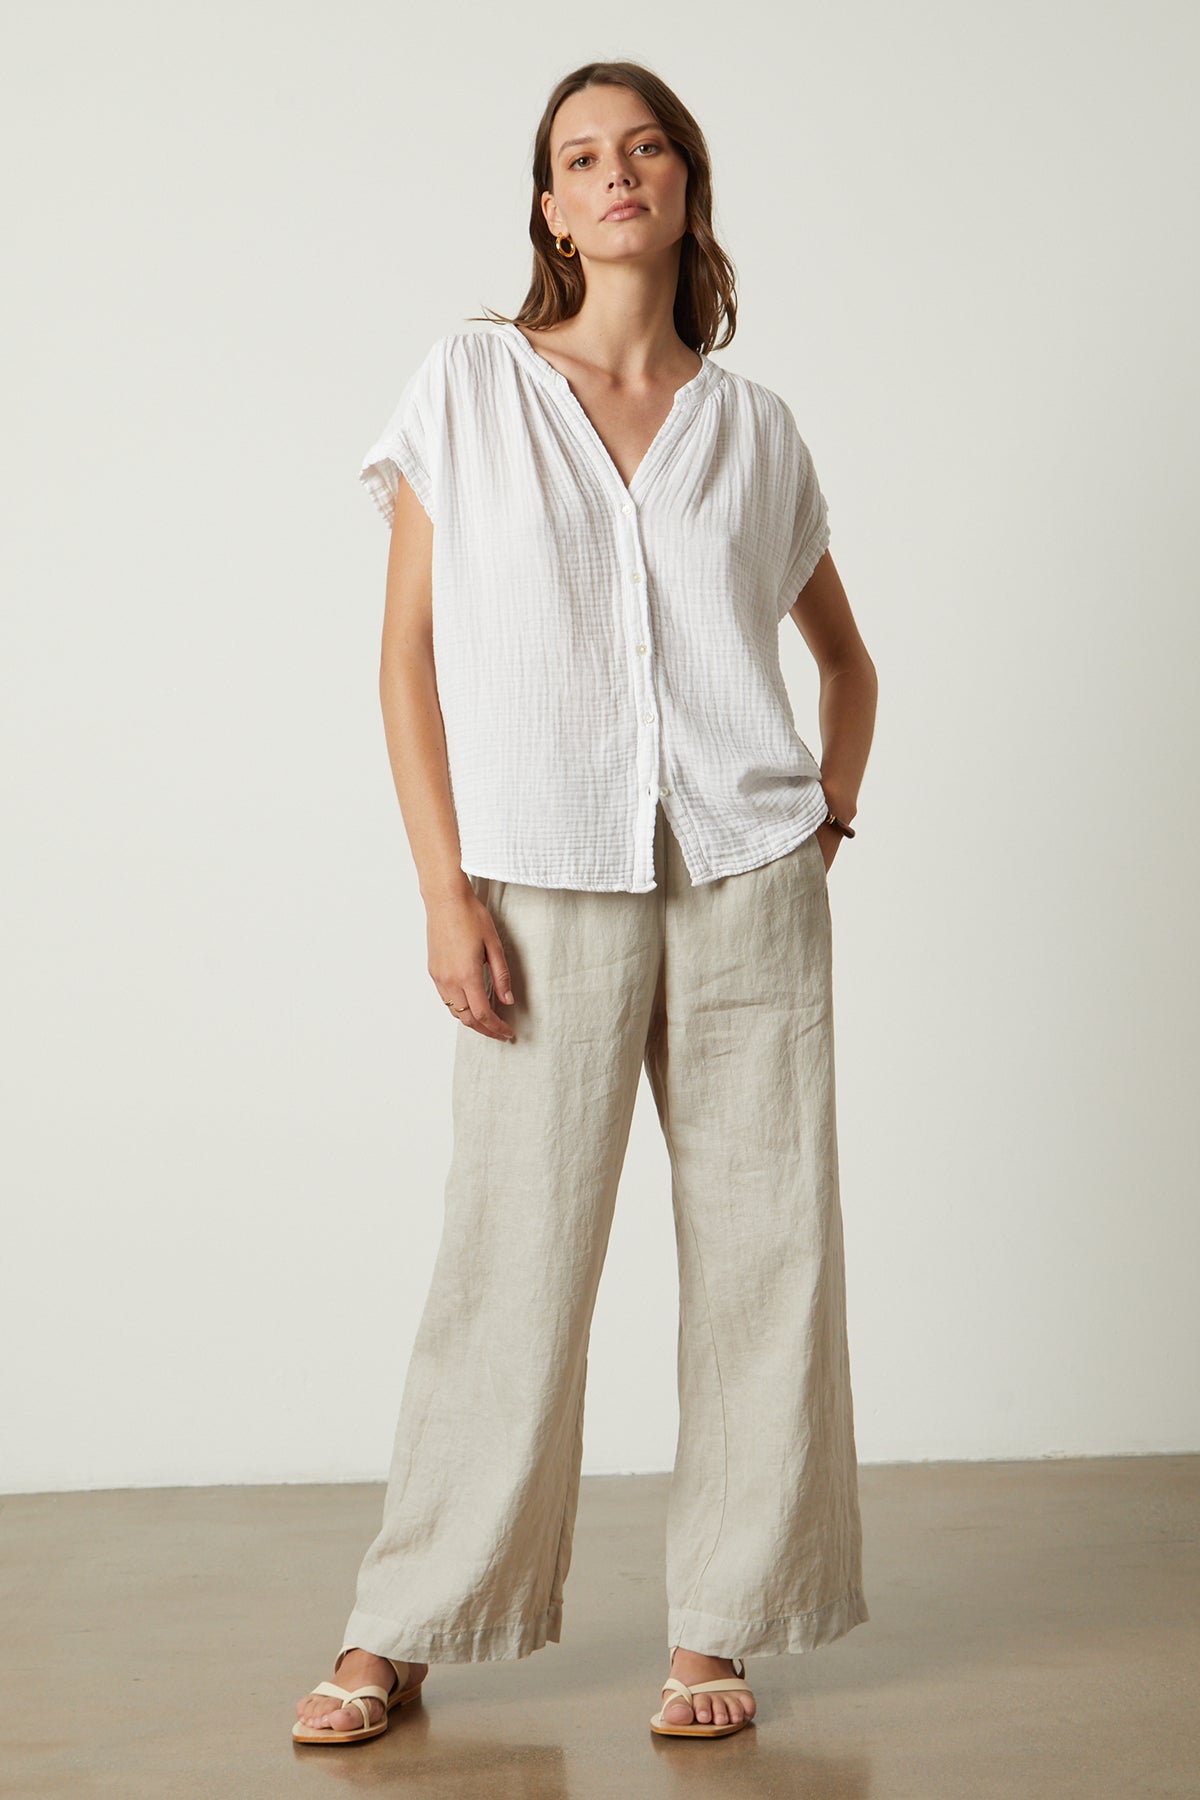 The model is wearing a Velvet by Graham & Spencer PAMELA COTTON GAUZE BUTTON-UP TOP and wide leg pants.-26022865109185